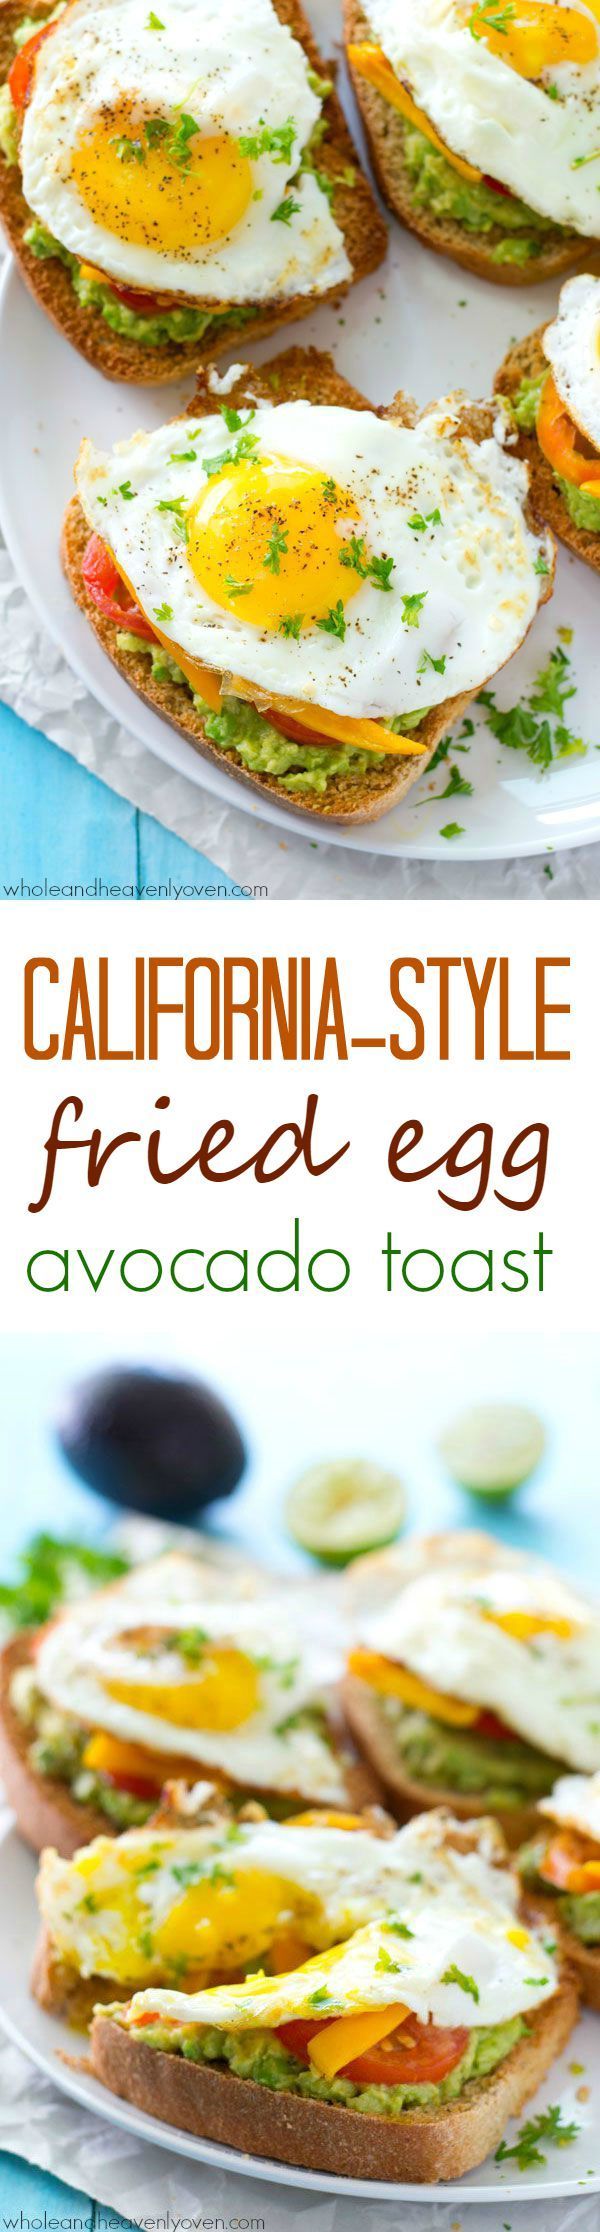 Avocado toast is given a fun California-style twist! This ultimate breakfast toast